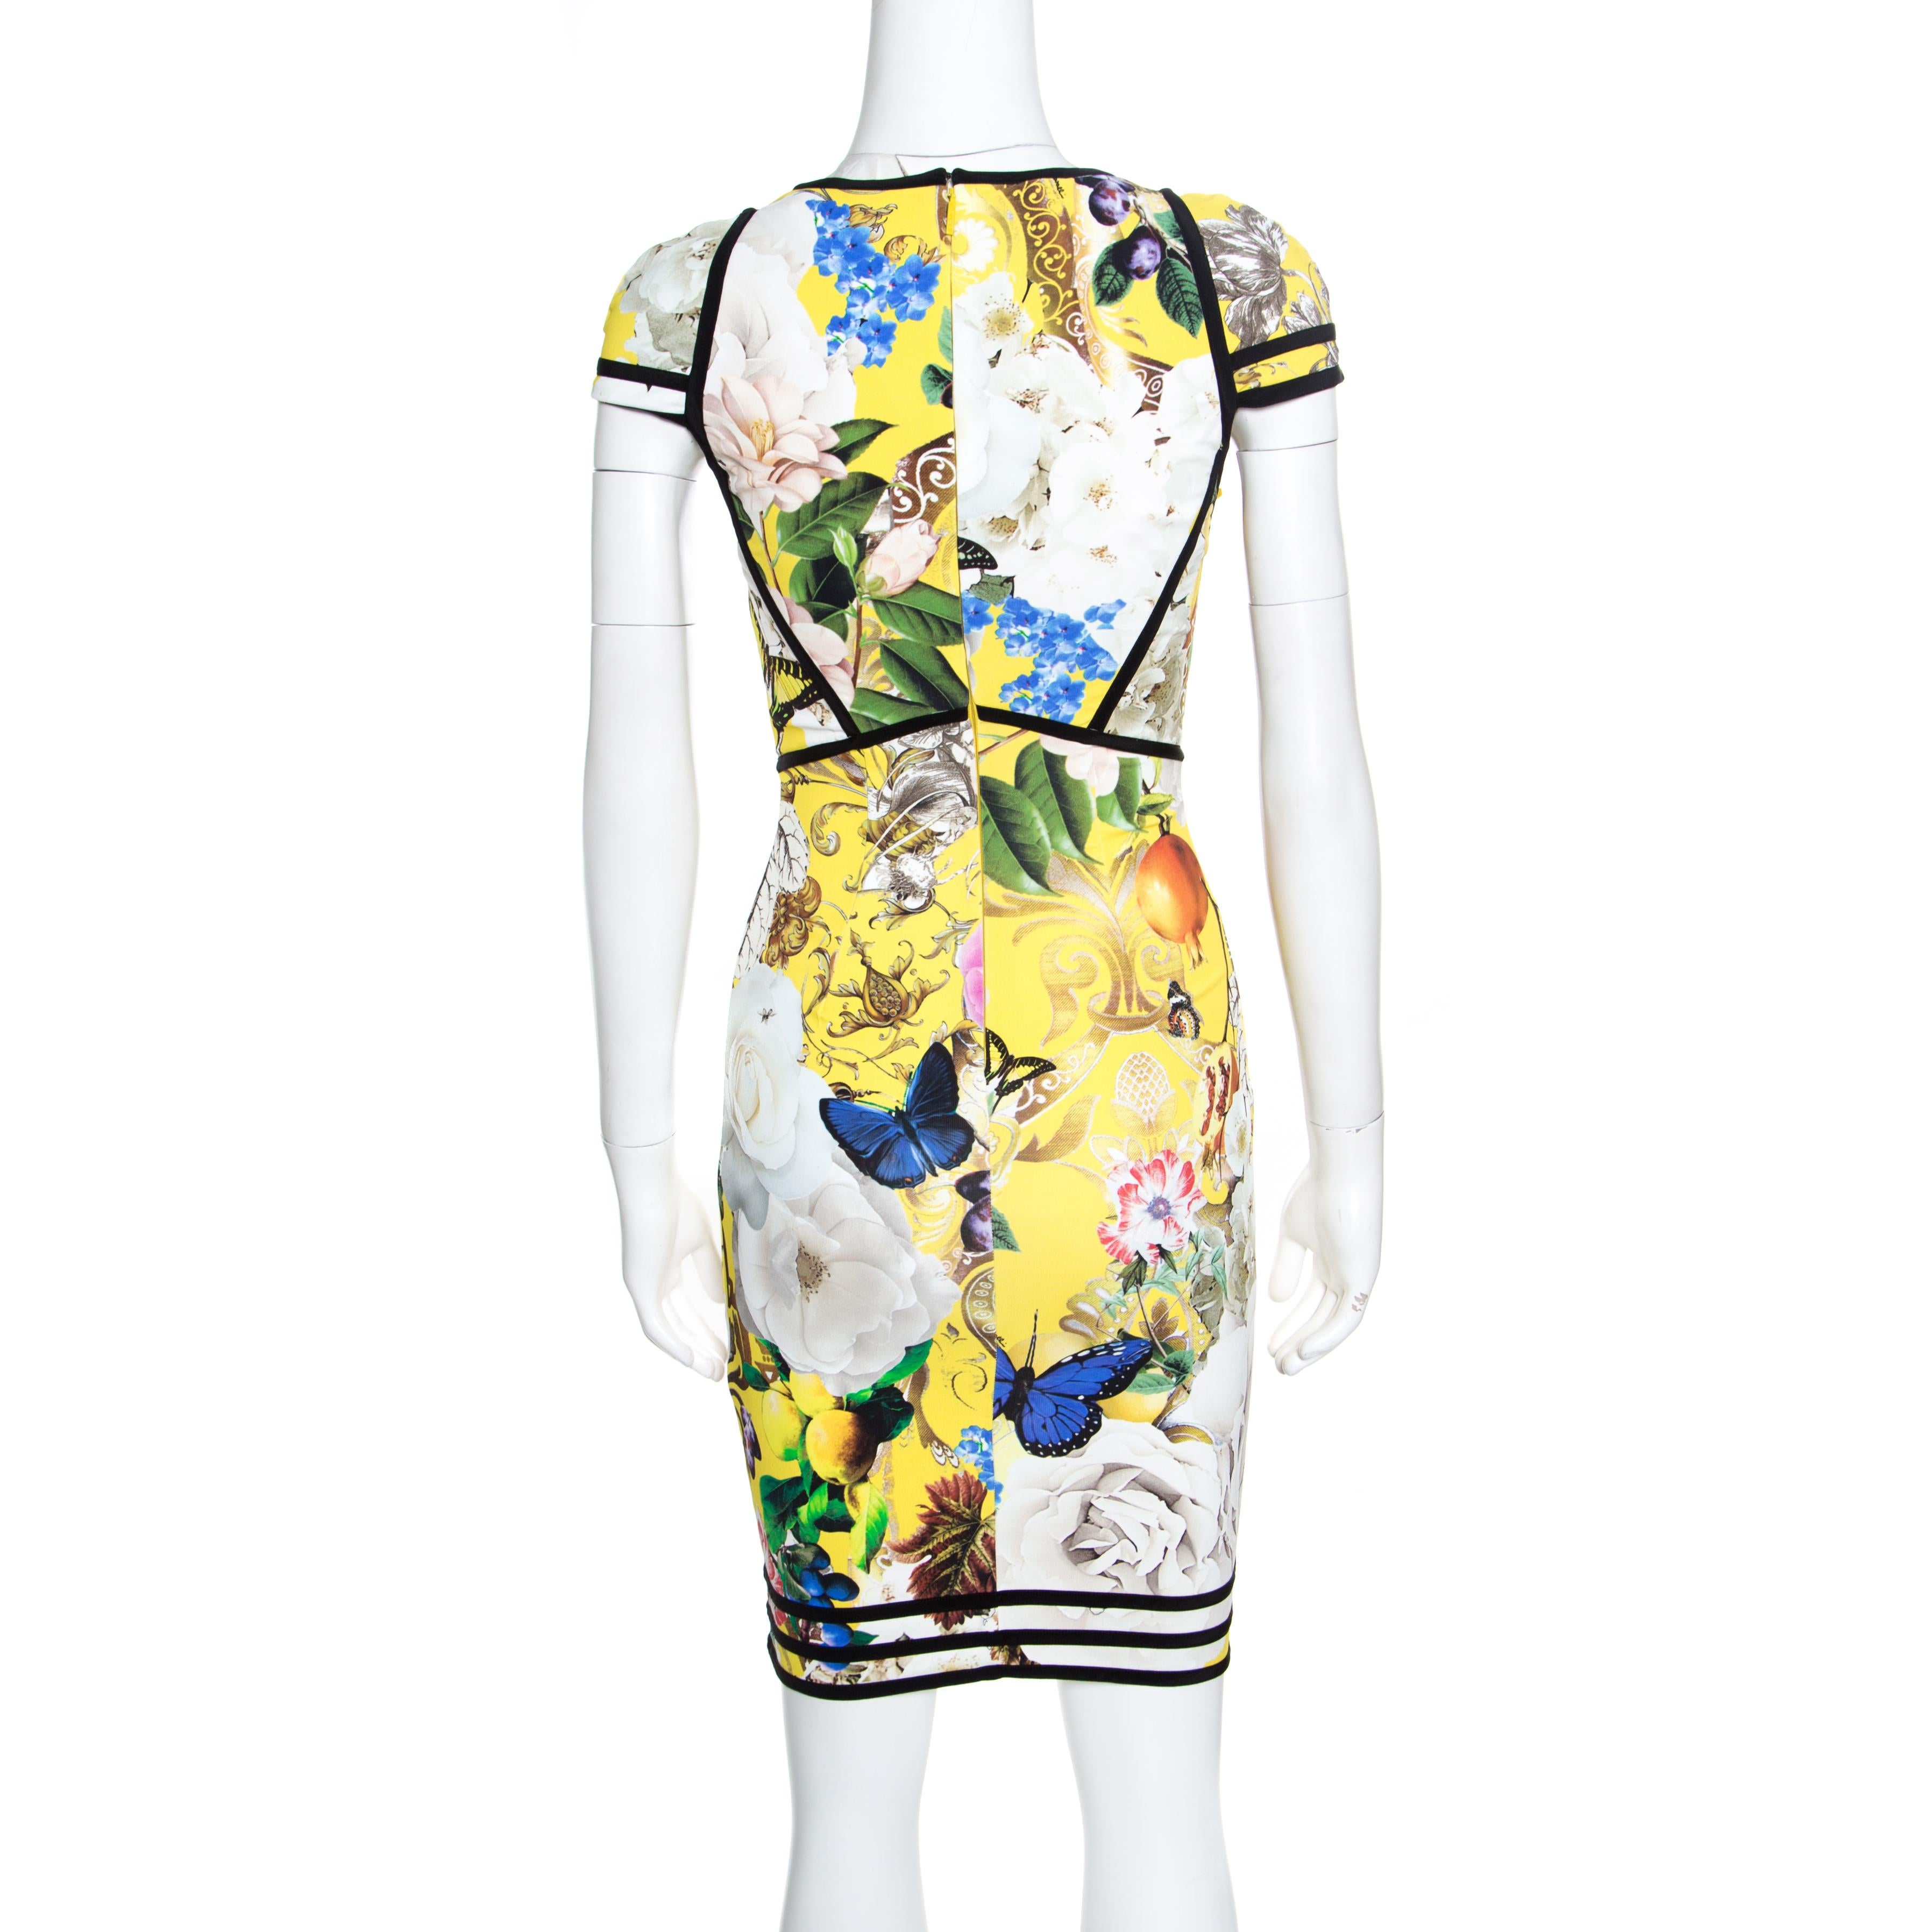 When it comes to dressing up in Roberto Cavalli, you are sure to make an impression! This yellow Punto dress is made of a viscose blend and features a vibrant fruit and gloral printed pattern all over it. It flaunts a flattering silhouette with a